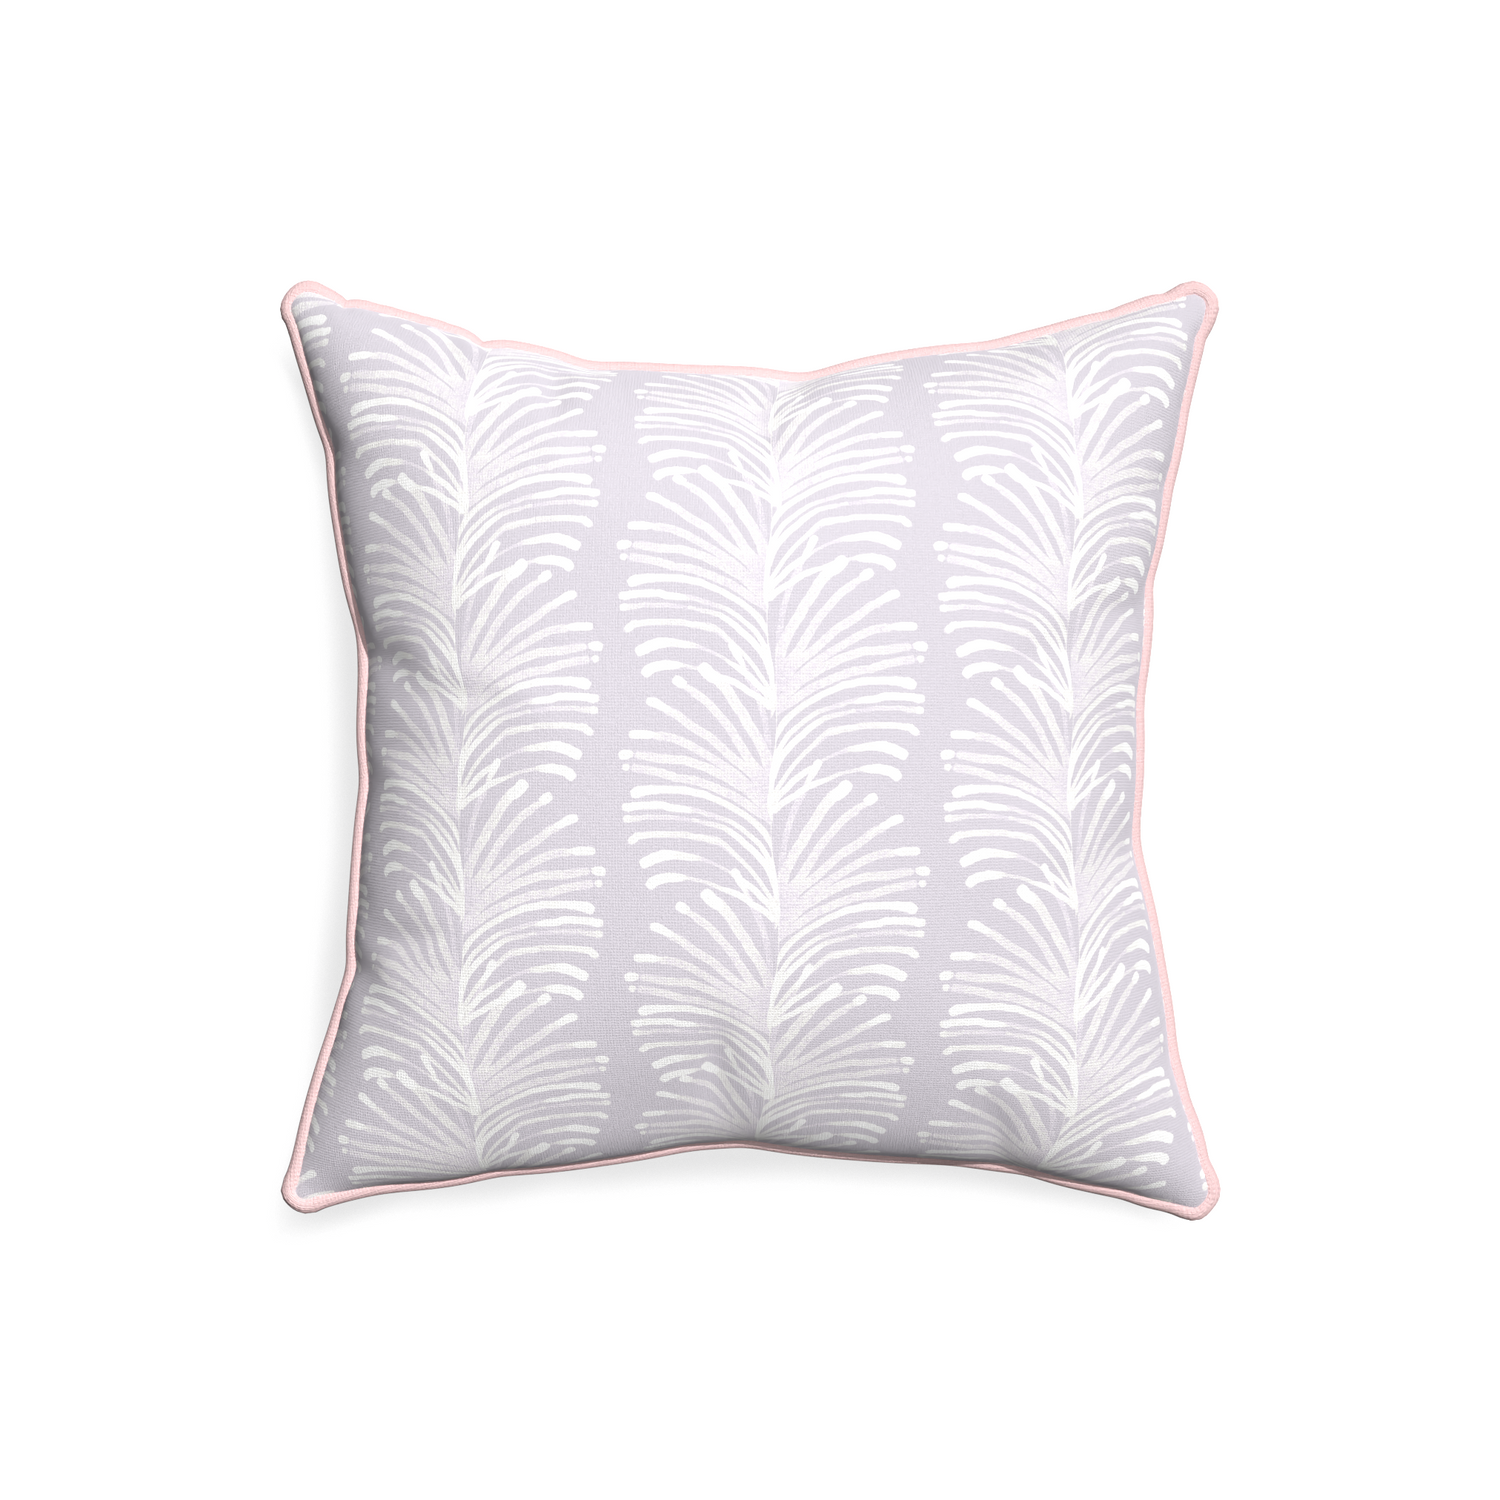 20-square emma lavender custom pillow with petal piping on white background